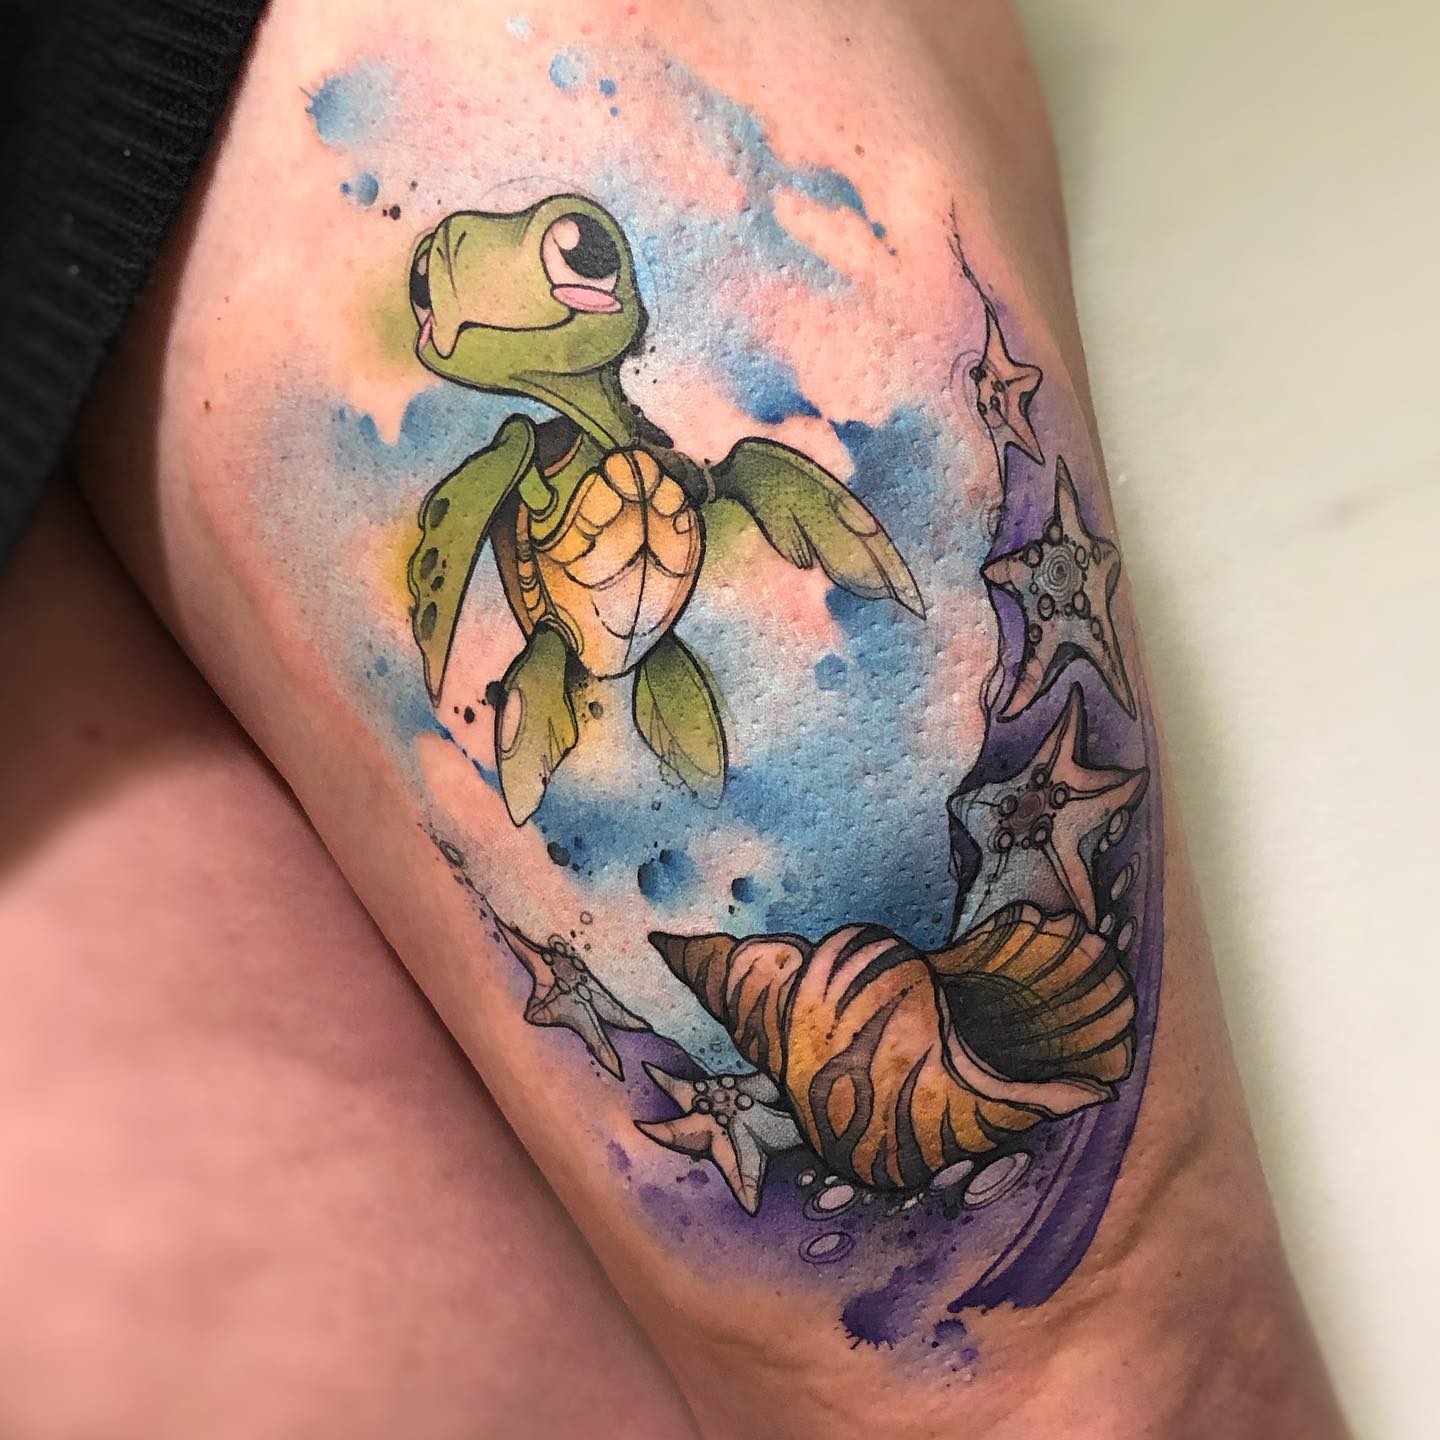 Being a symbol of immortality, strength and stability, sea turtles are amazing animals to get a tattoo. In the tattoo design above, a baby turtle is inked to make your upper leg stand out. A baby sea turtle tries to find its own way and survive in a wild ocean, so if you feel like this, you should get it.